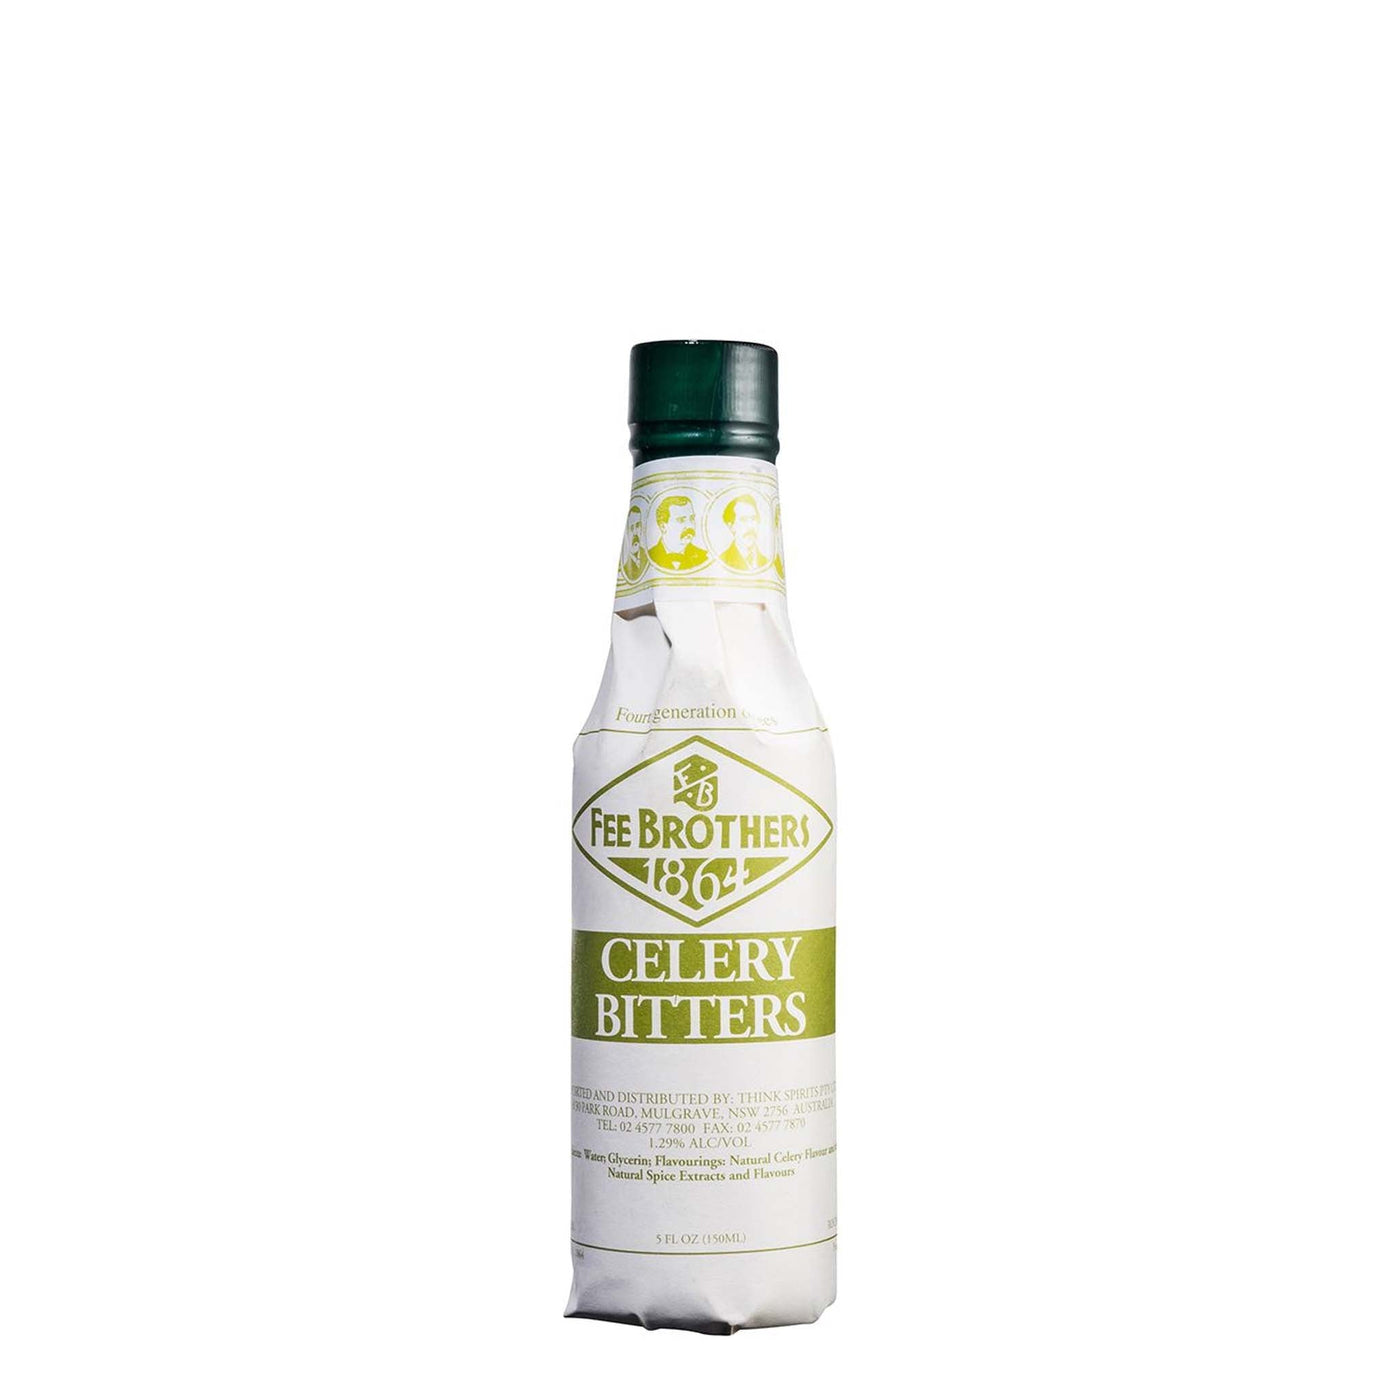 Fee Brothers Celery Bitters - Spiritly